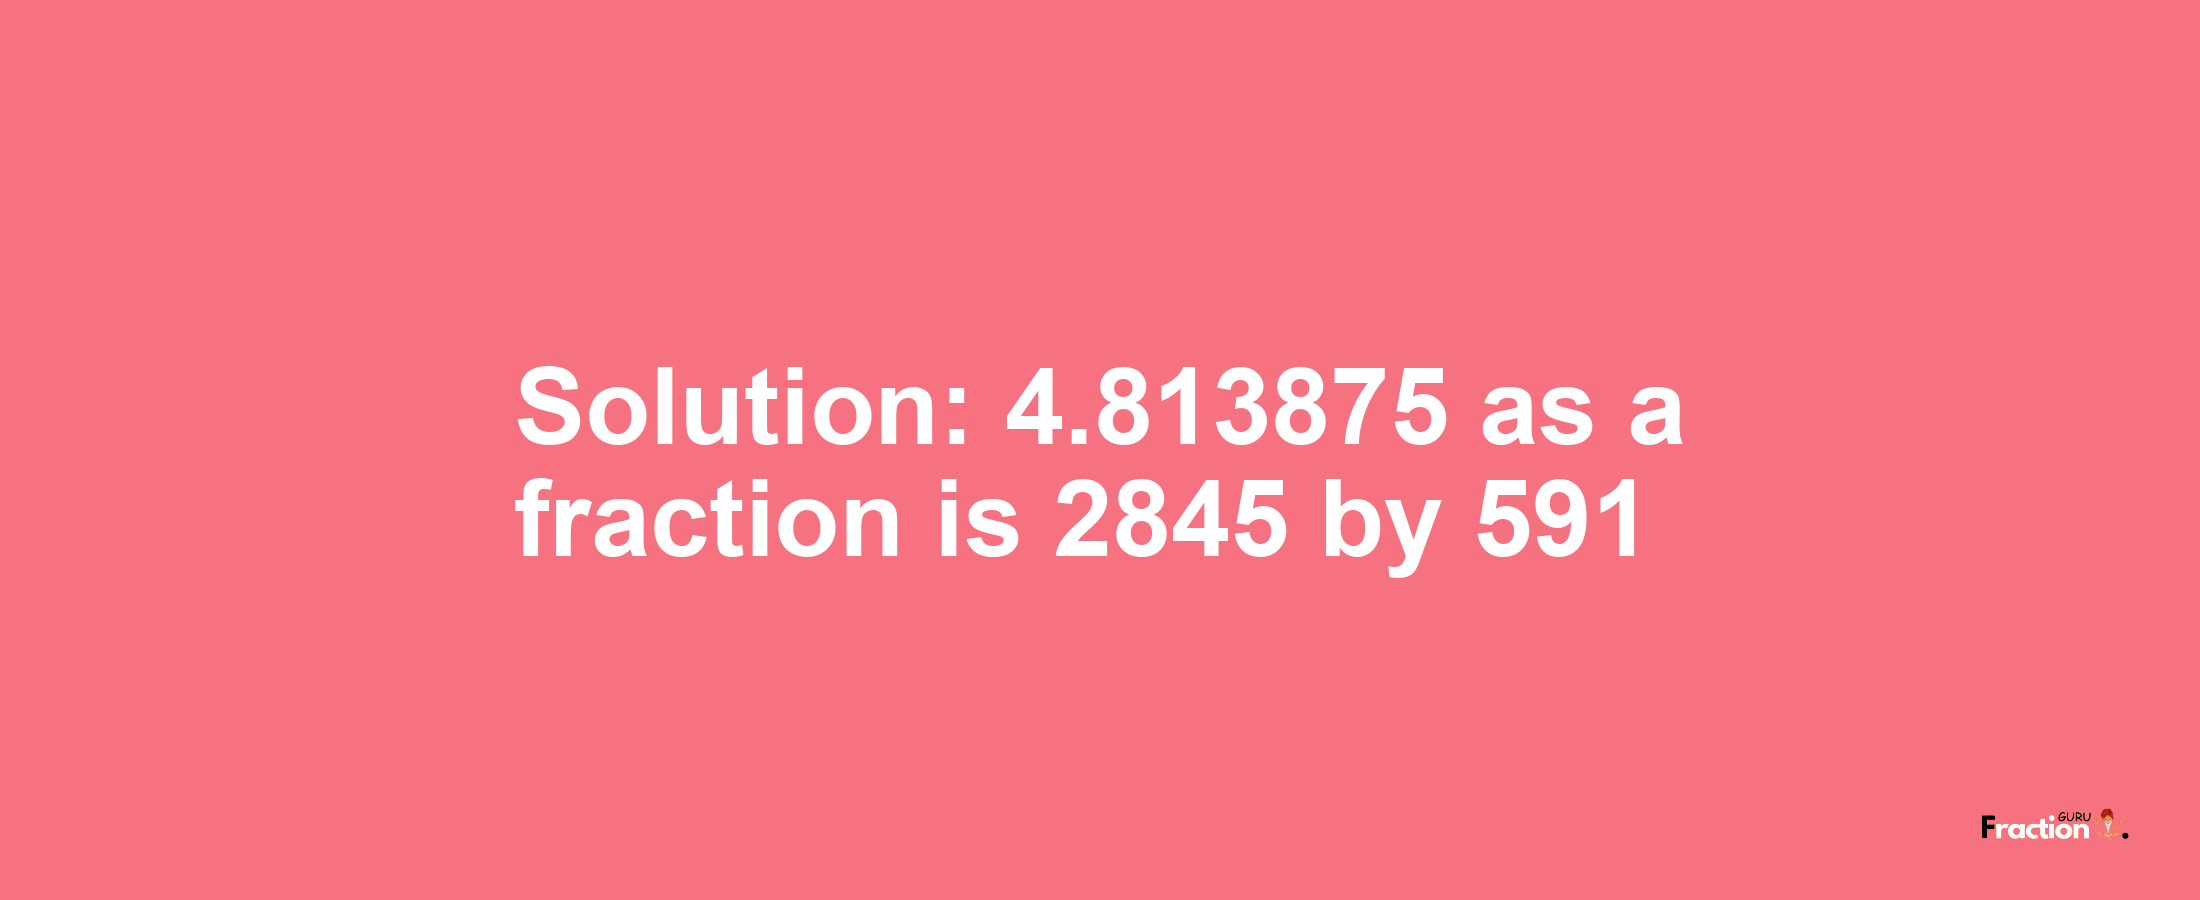 Solution:4.813875 as a fraction is 2845/591